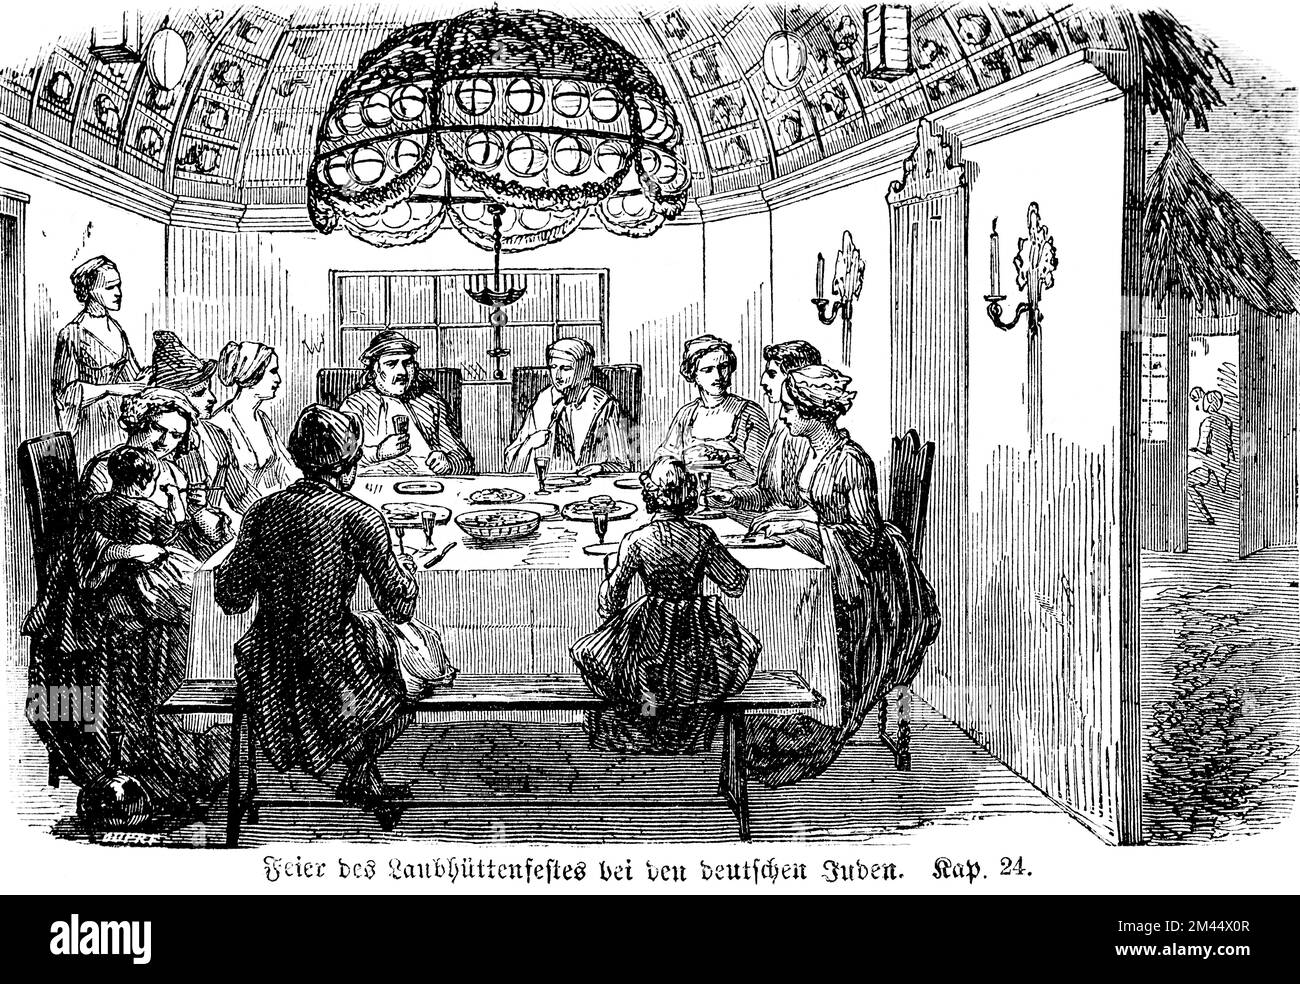 Celebration of the Feast of the Blossoms among the German Jews, Book 3 of Moses, Chapter 24, Bible, meal, company, laid table, chandelier, bench Stock Photo